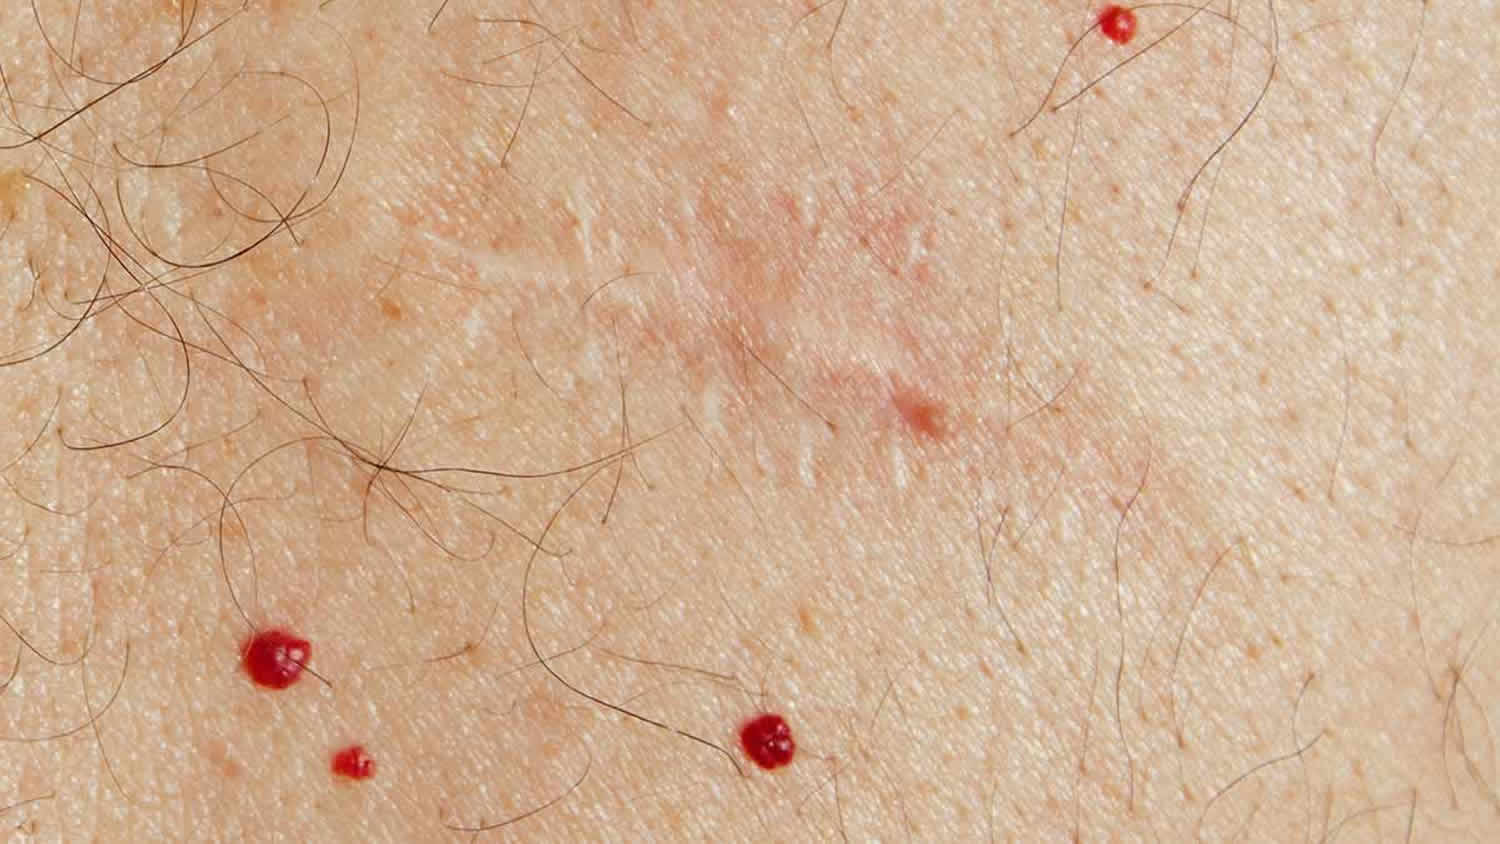 Cherry Angioma Causes And Treatment What Is A Cherry Angioma Causes